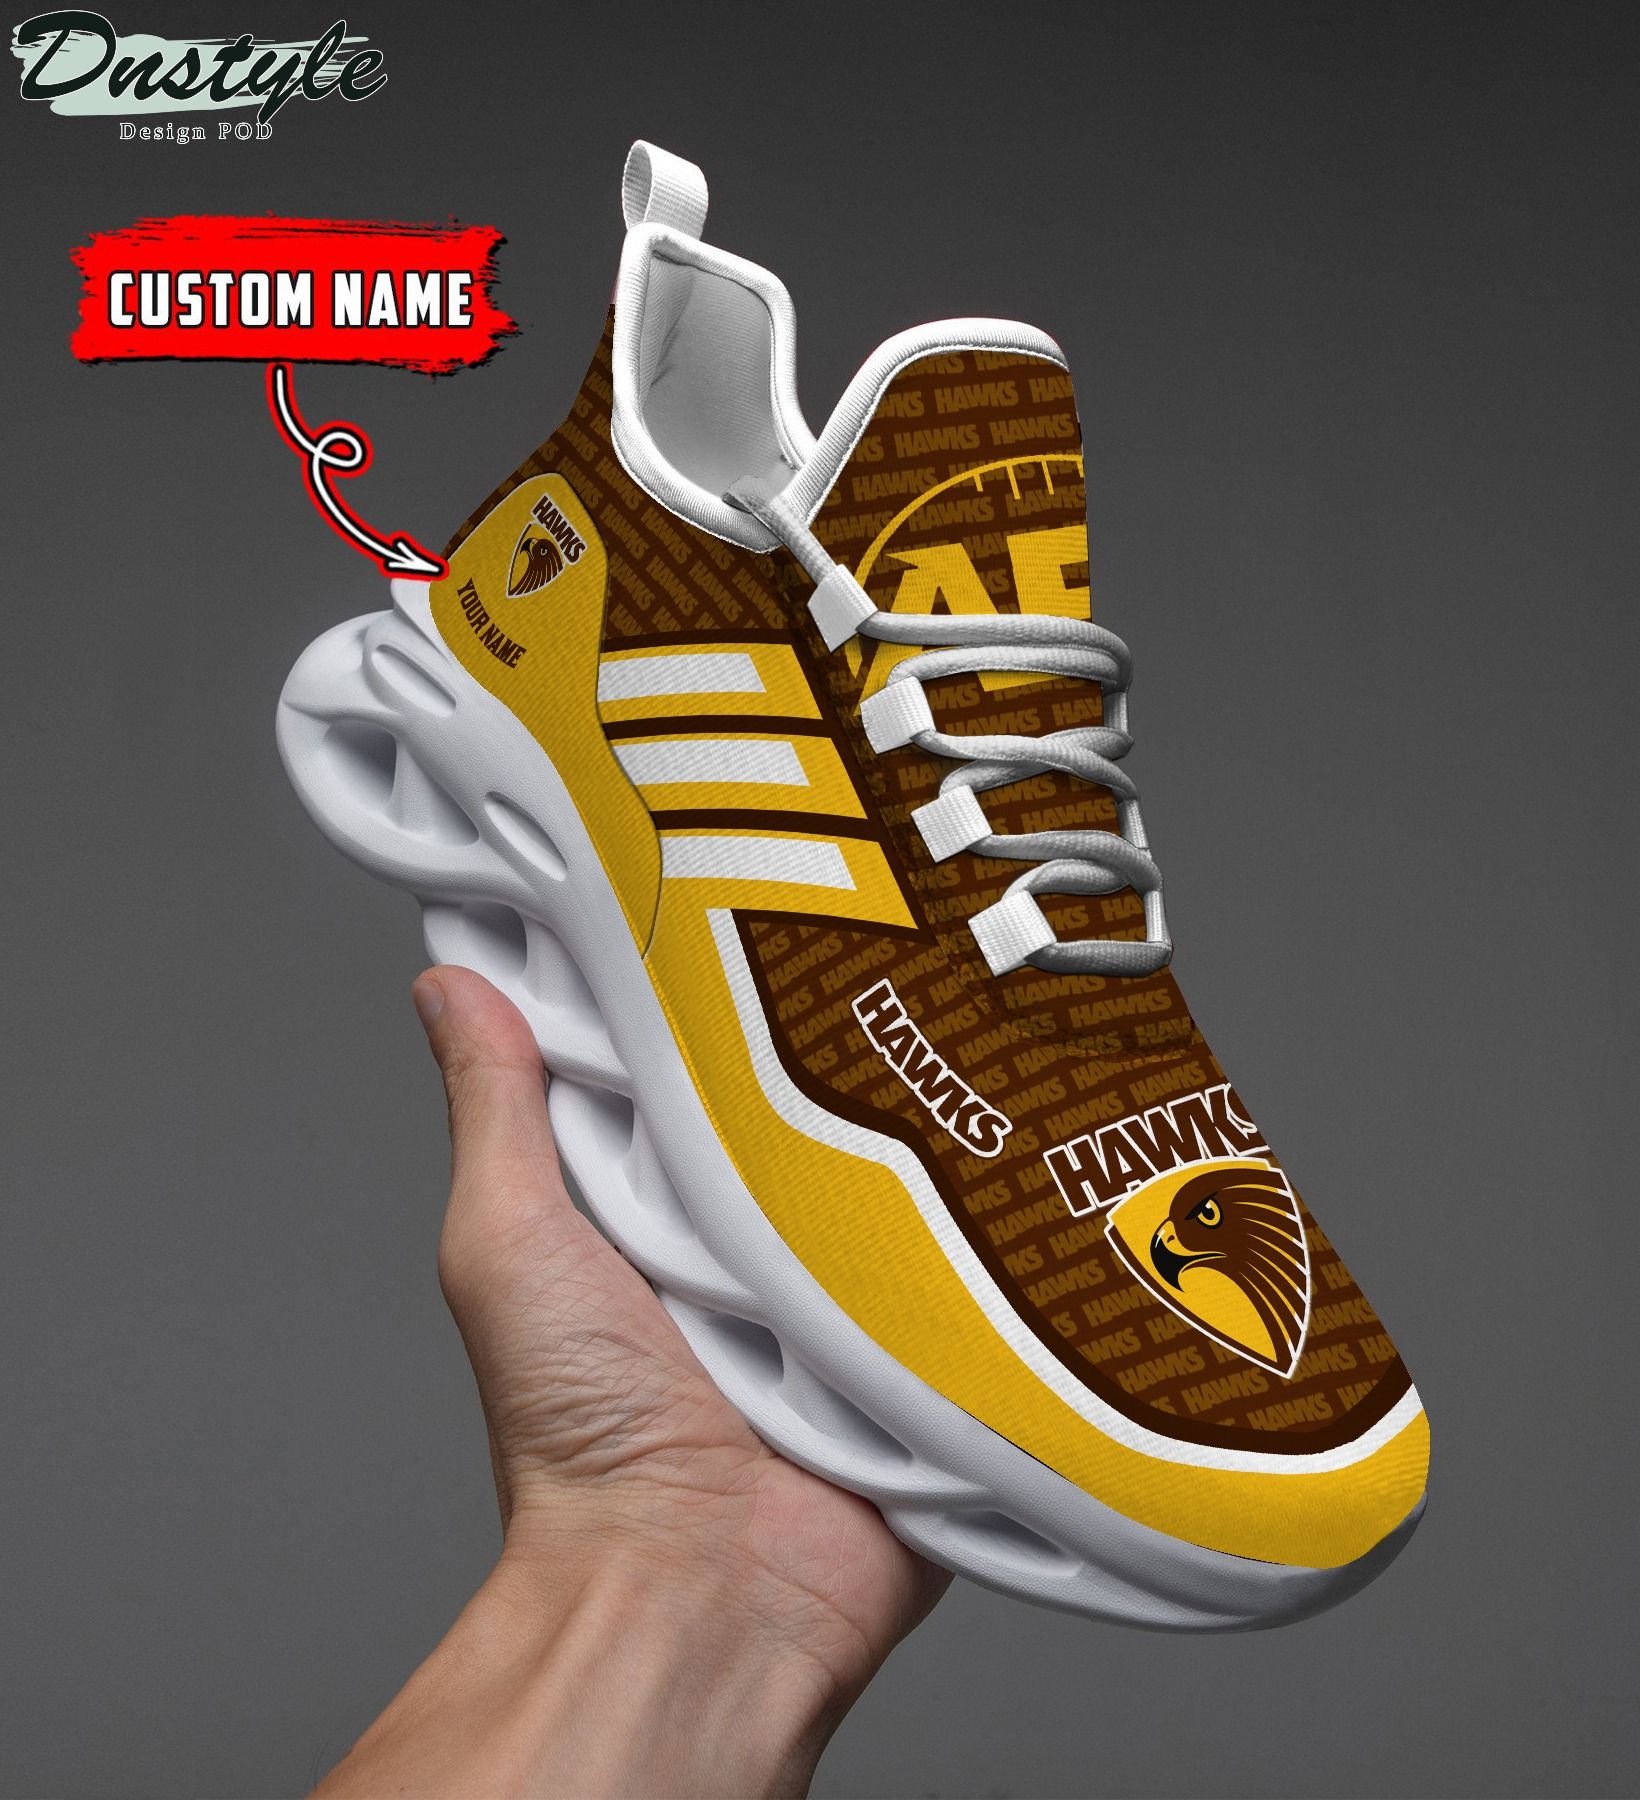 Hawks AFL personalized clunky max soul shoes